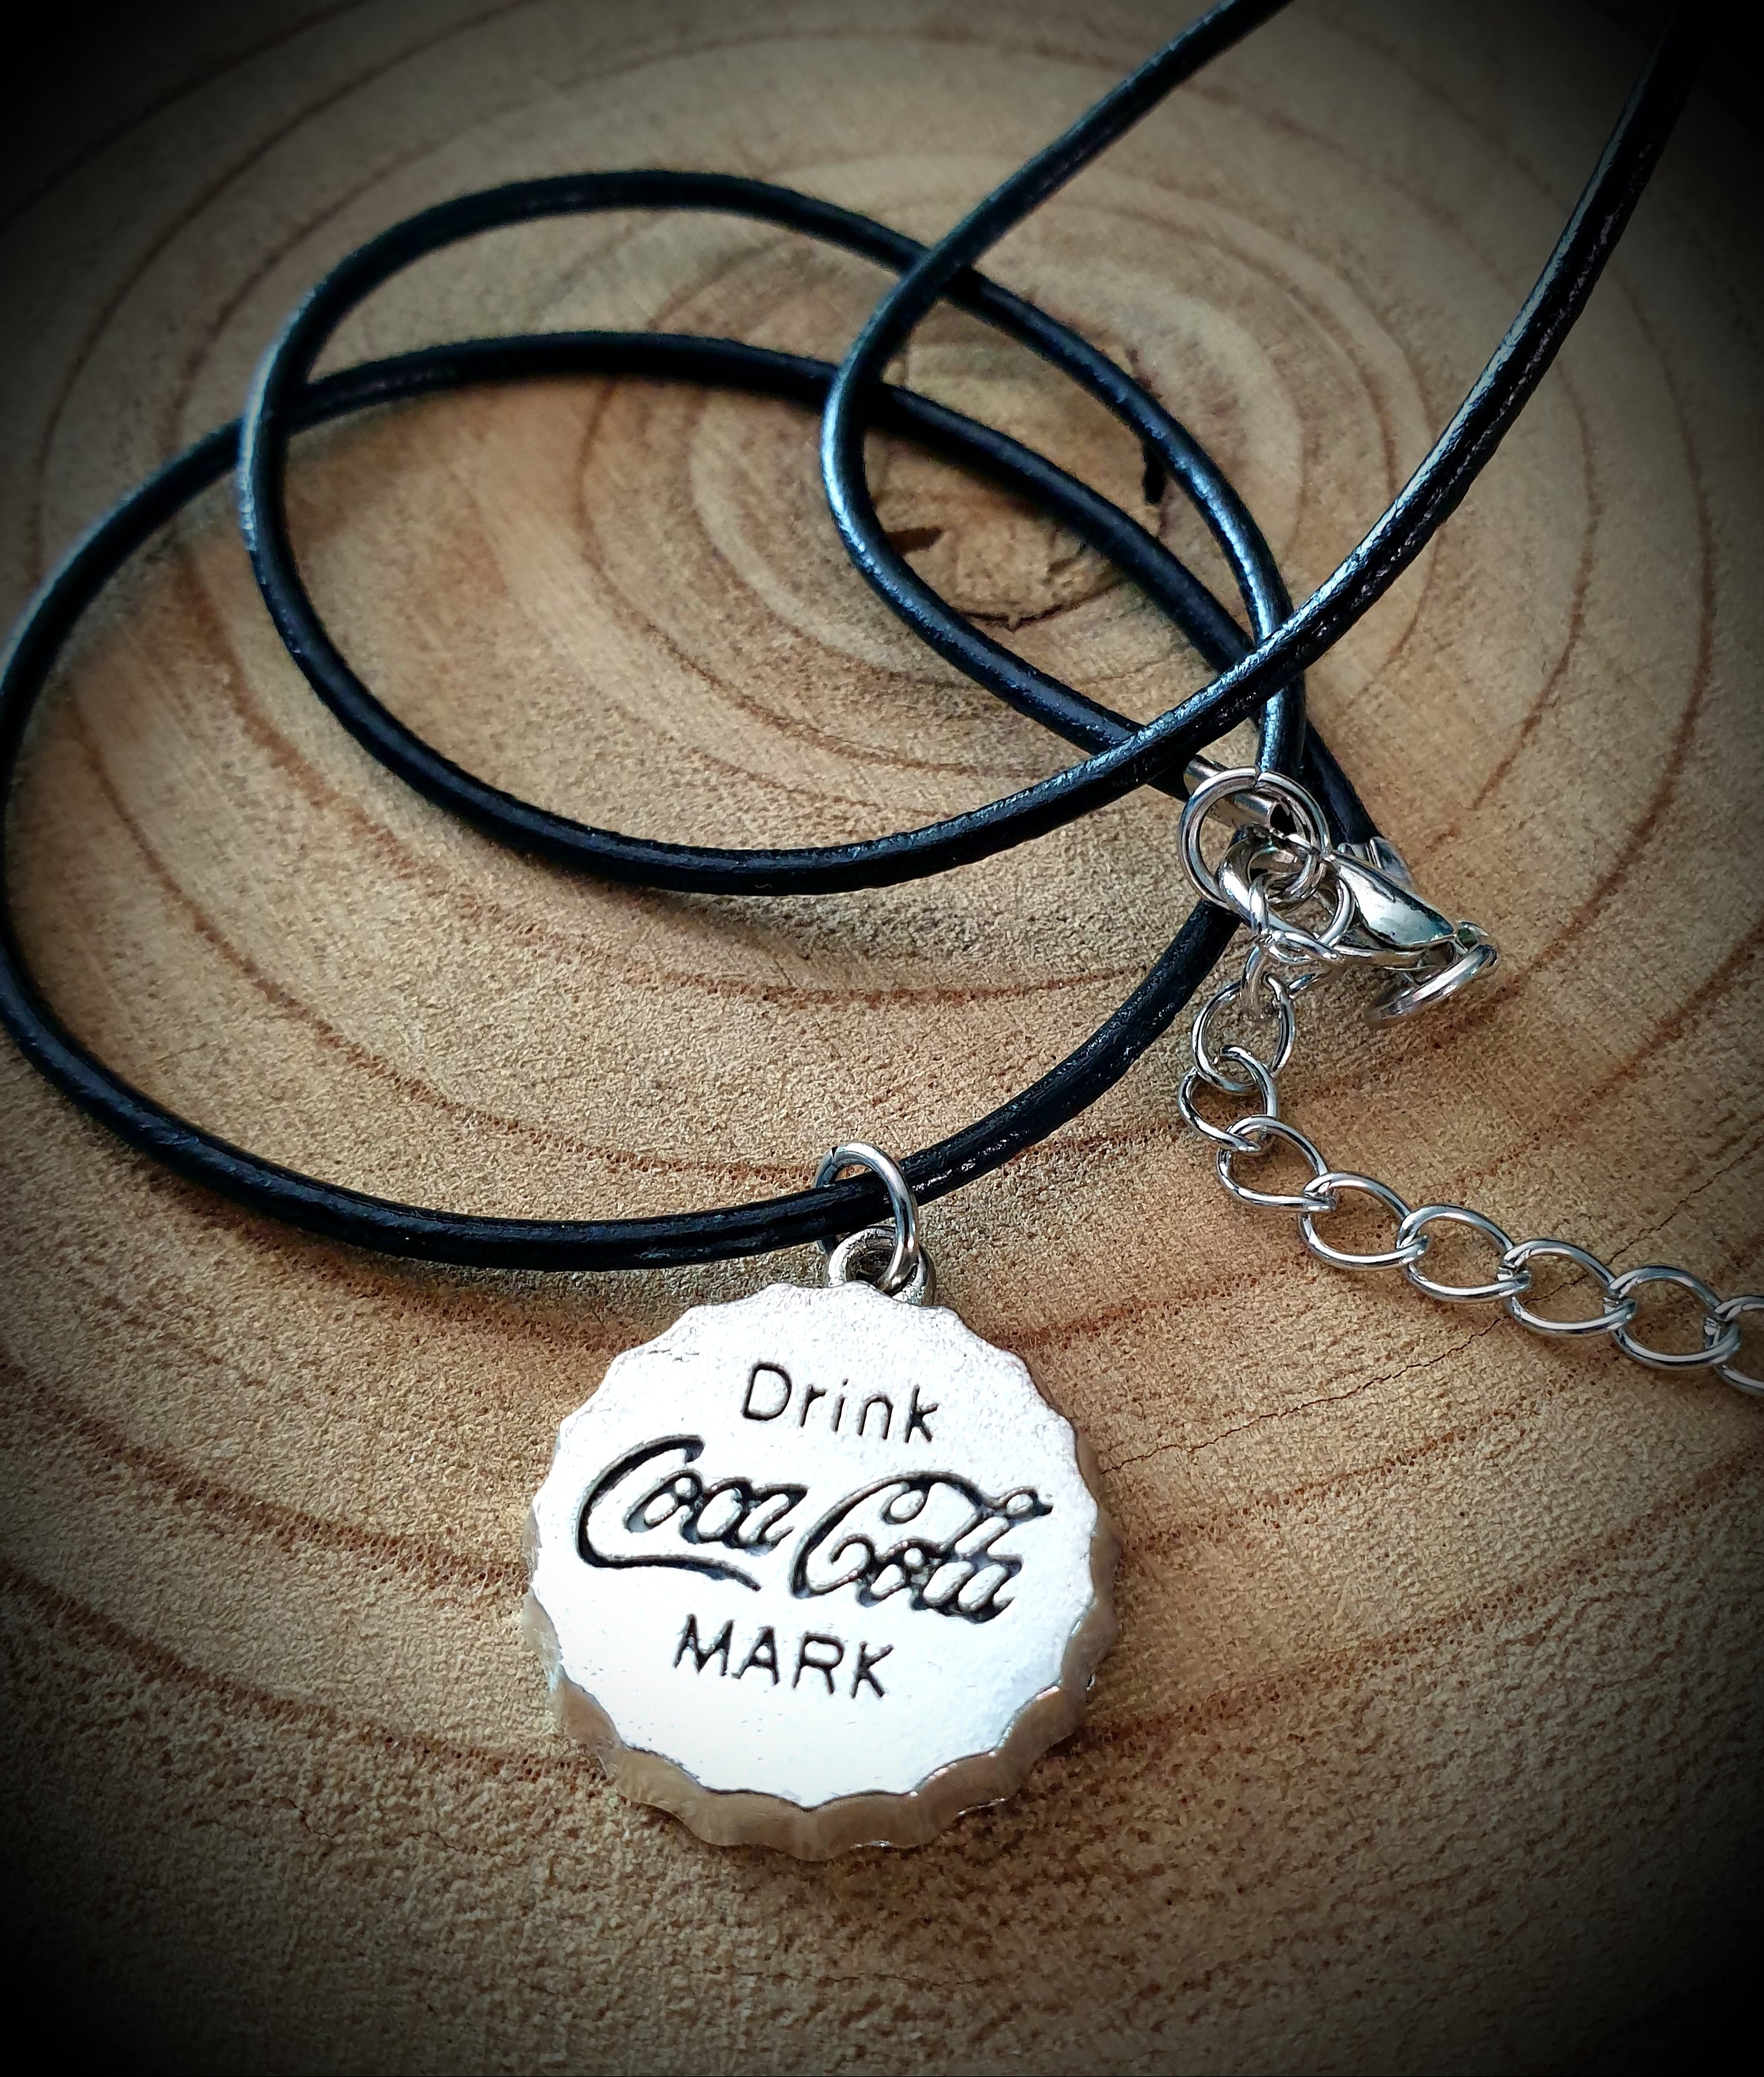 Coca-Cola Sea Glass Leather Necklace - The Spotted Door